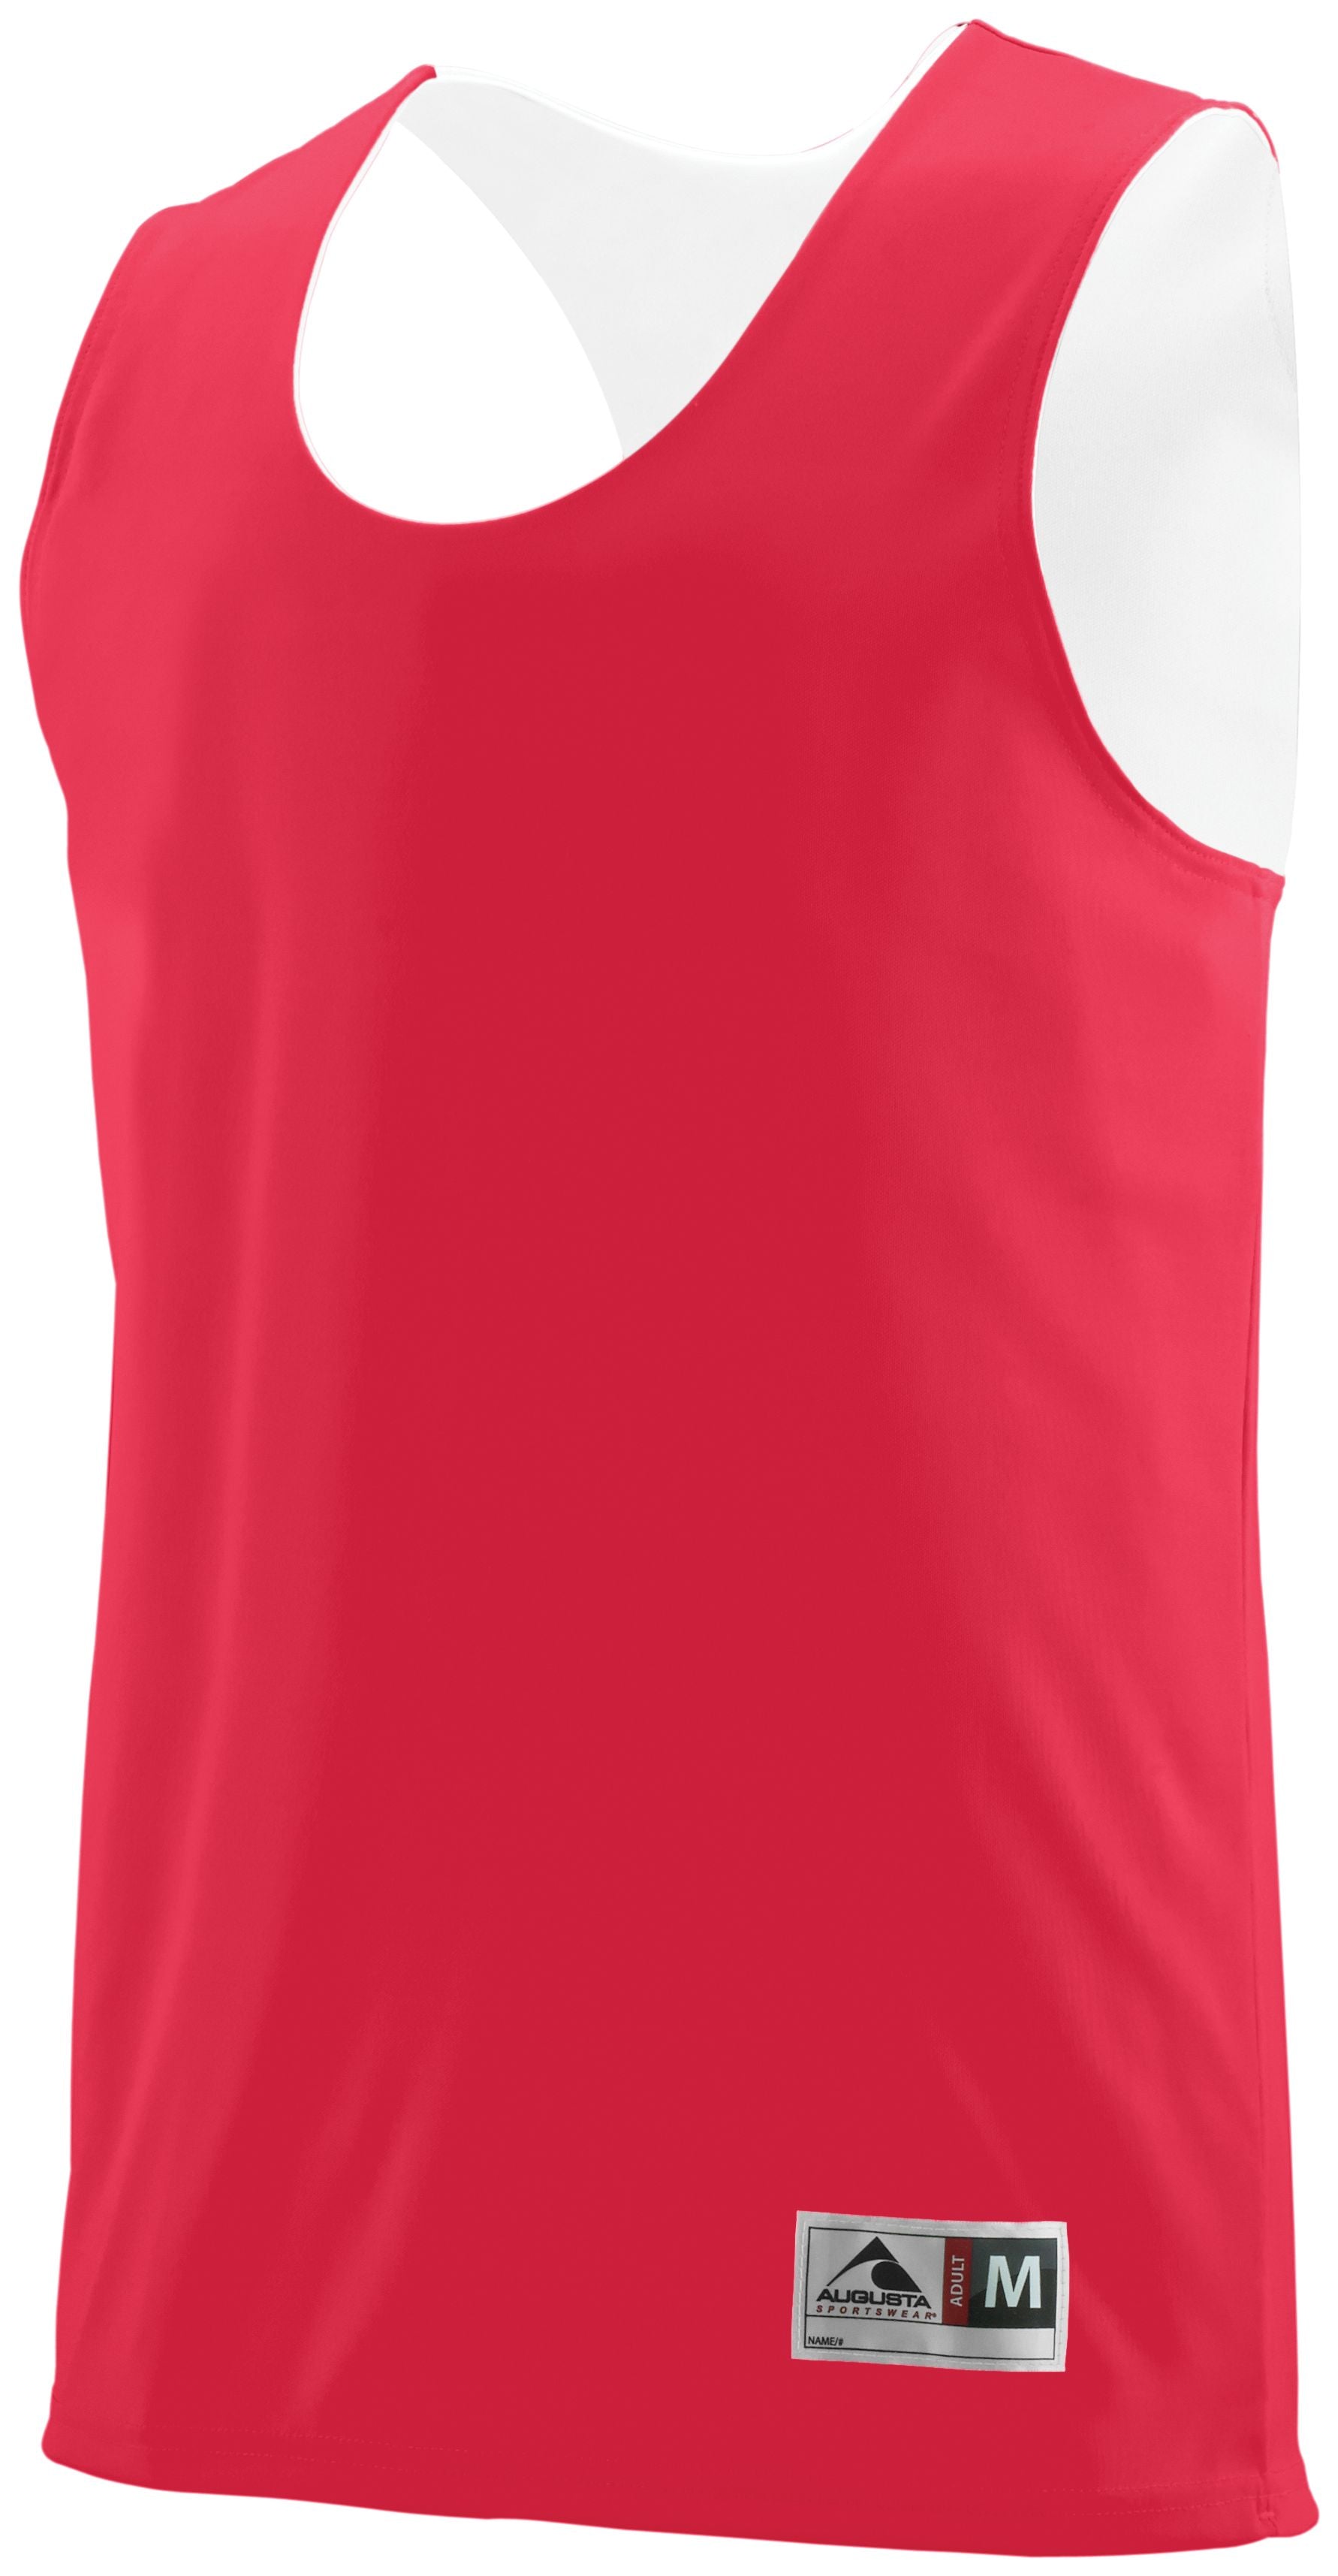 Augusta Sportswear Youth Reversible Wicking Tank in Red/White  -Part of the Youth, Youth-Tank, Augusta-Products, Basketball, Shirts, All-Sports, All-Sports-1 product lines at KanaleyCreations.com